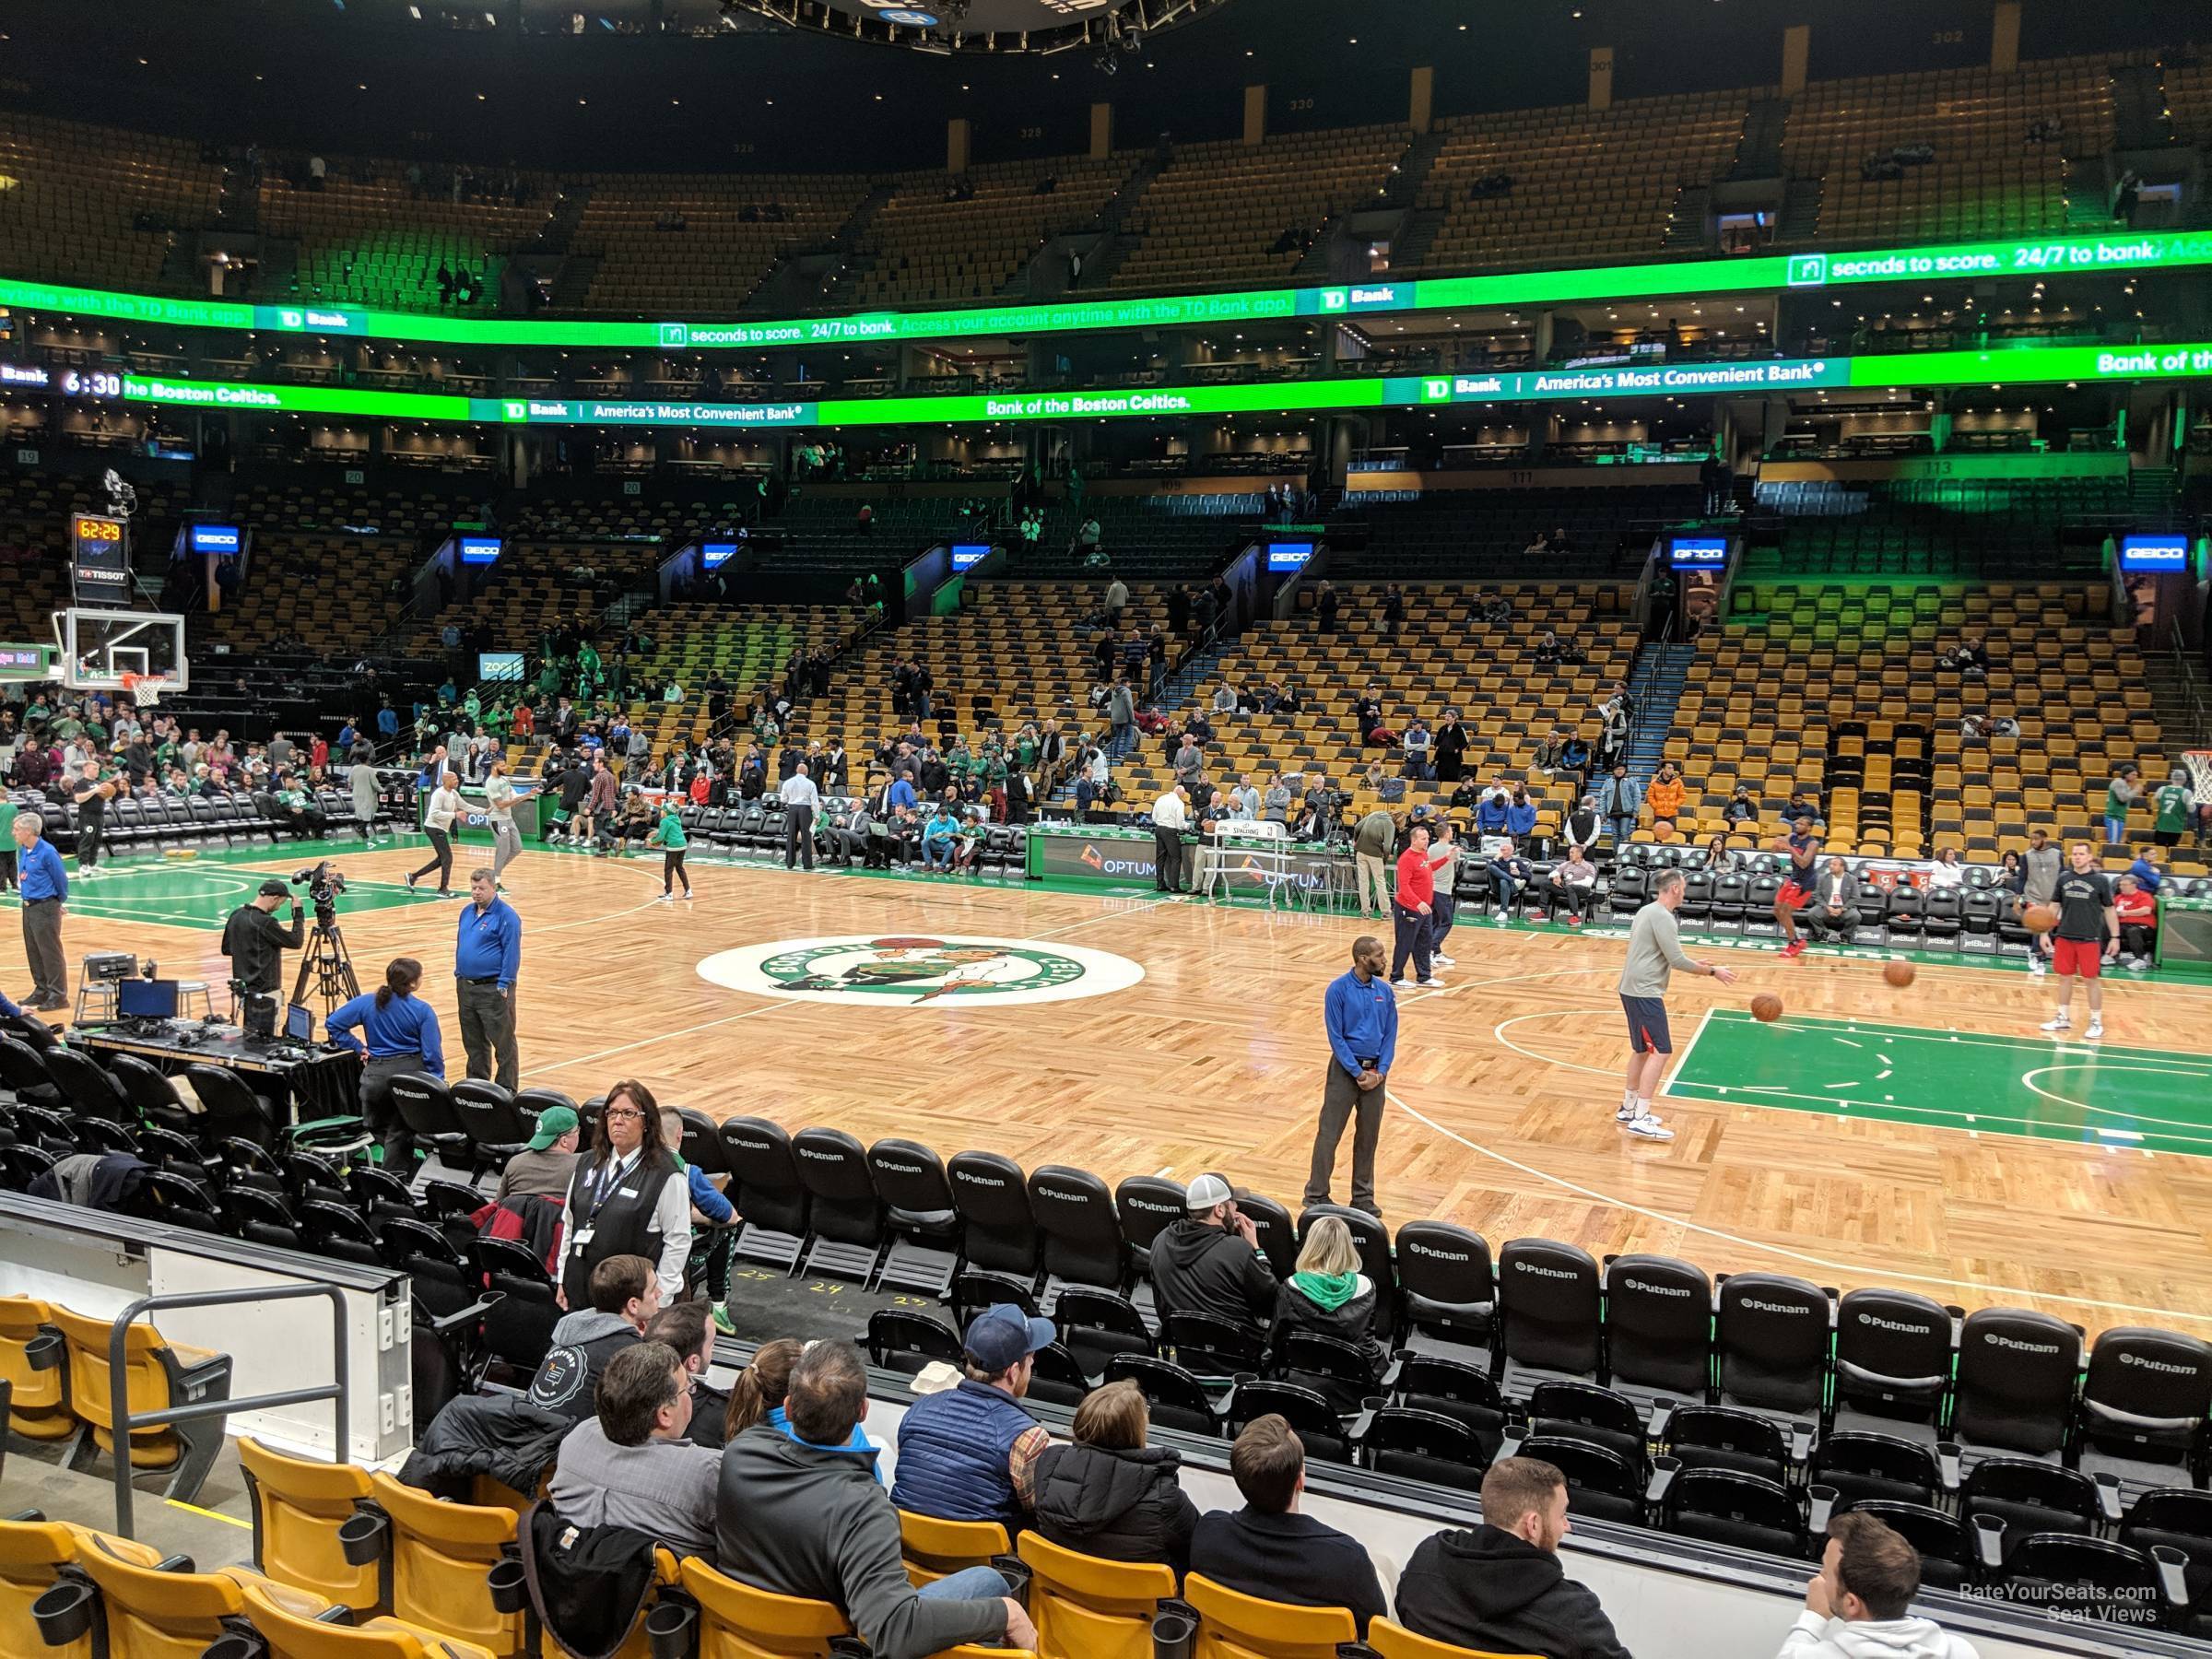 loge 11, row 7 seat view  for basketball - td garden